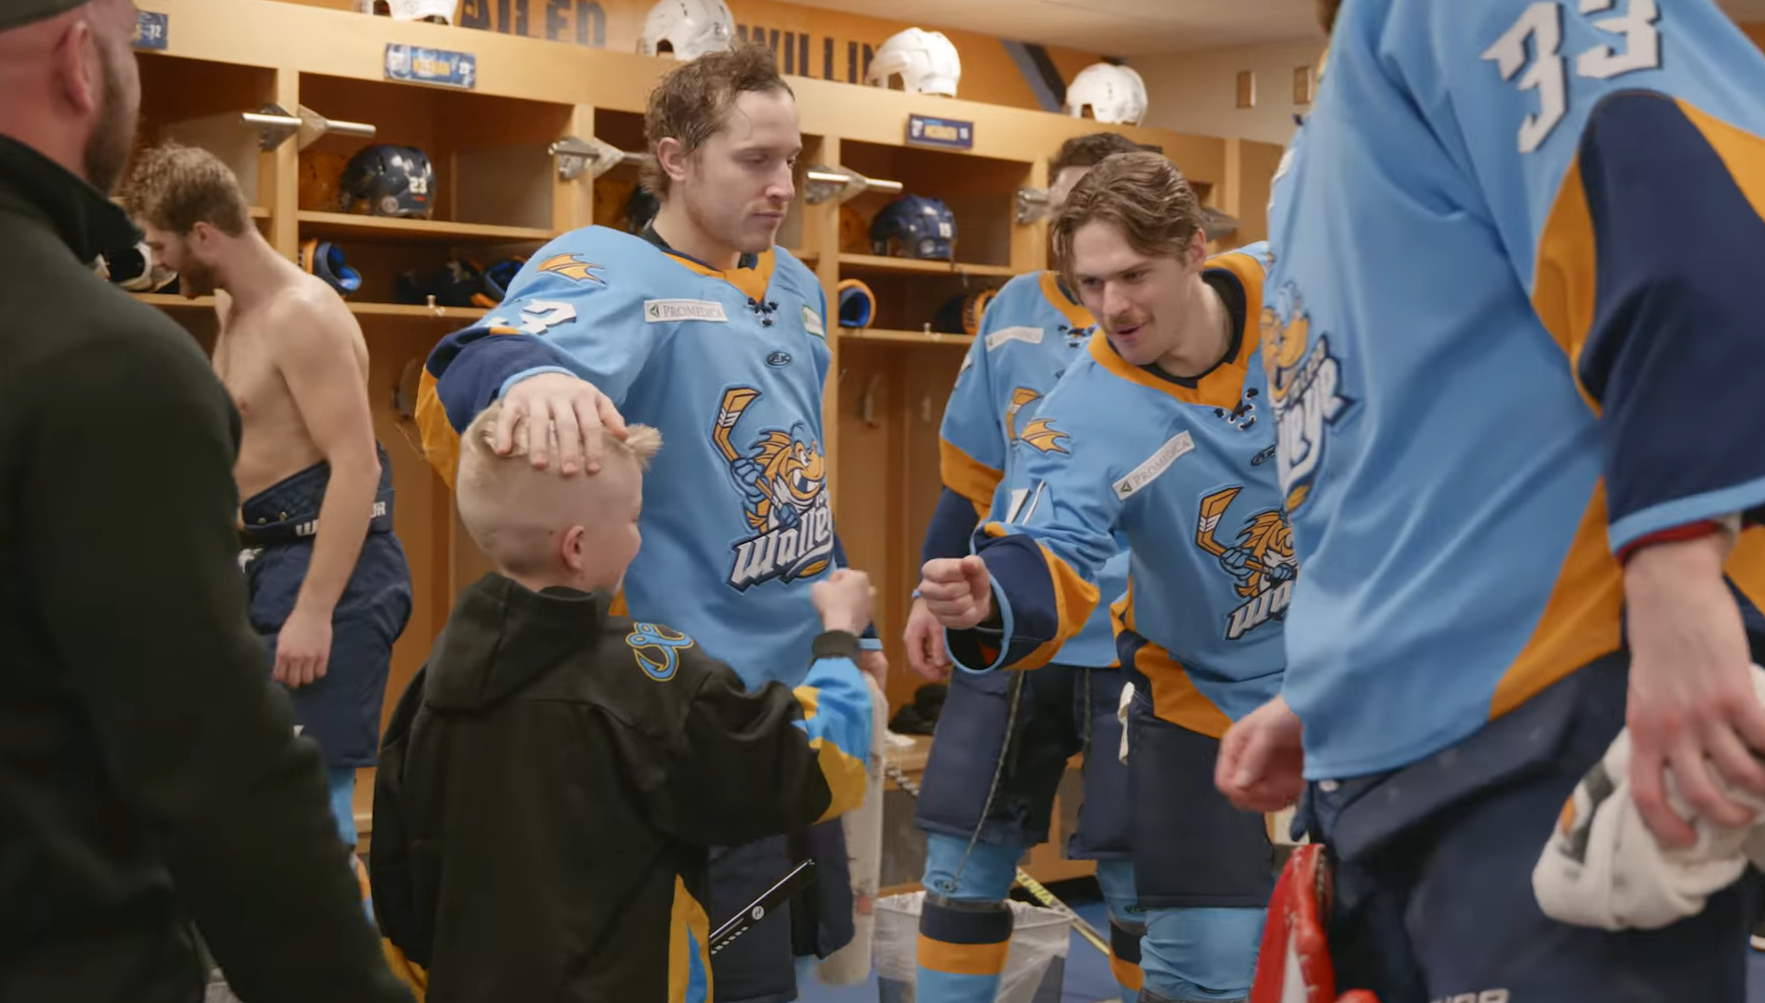 Toledo Walleye give hockey equipment to boy who lost his gear in house fire